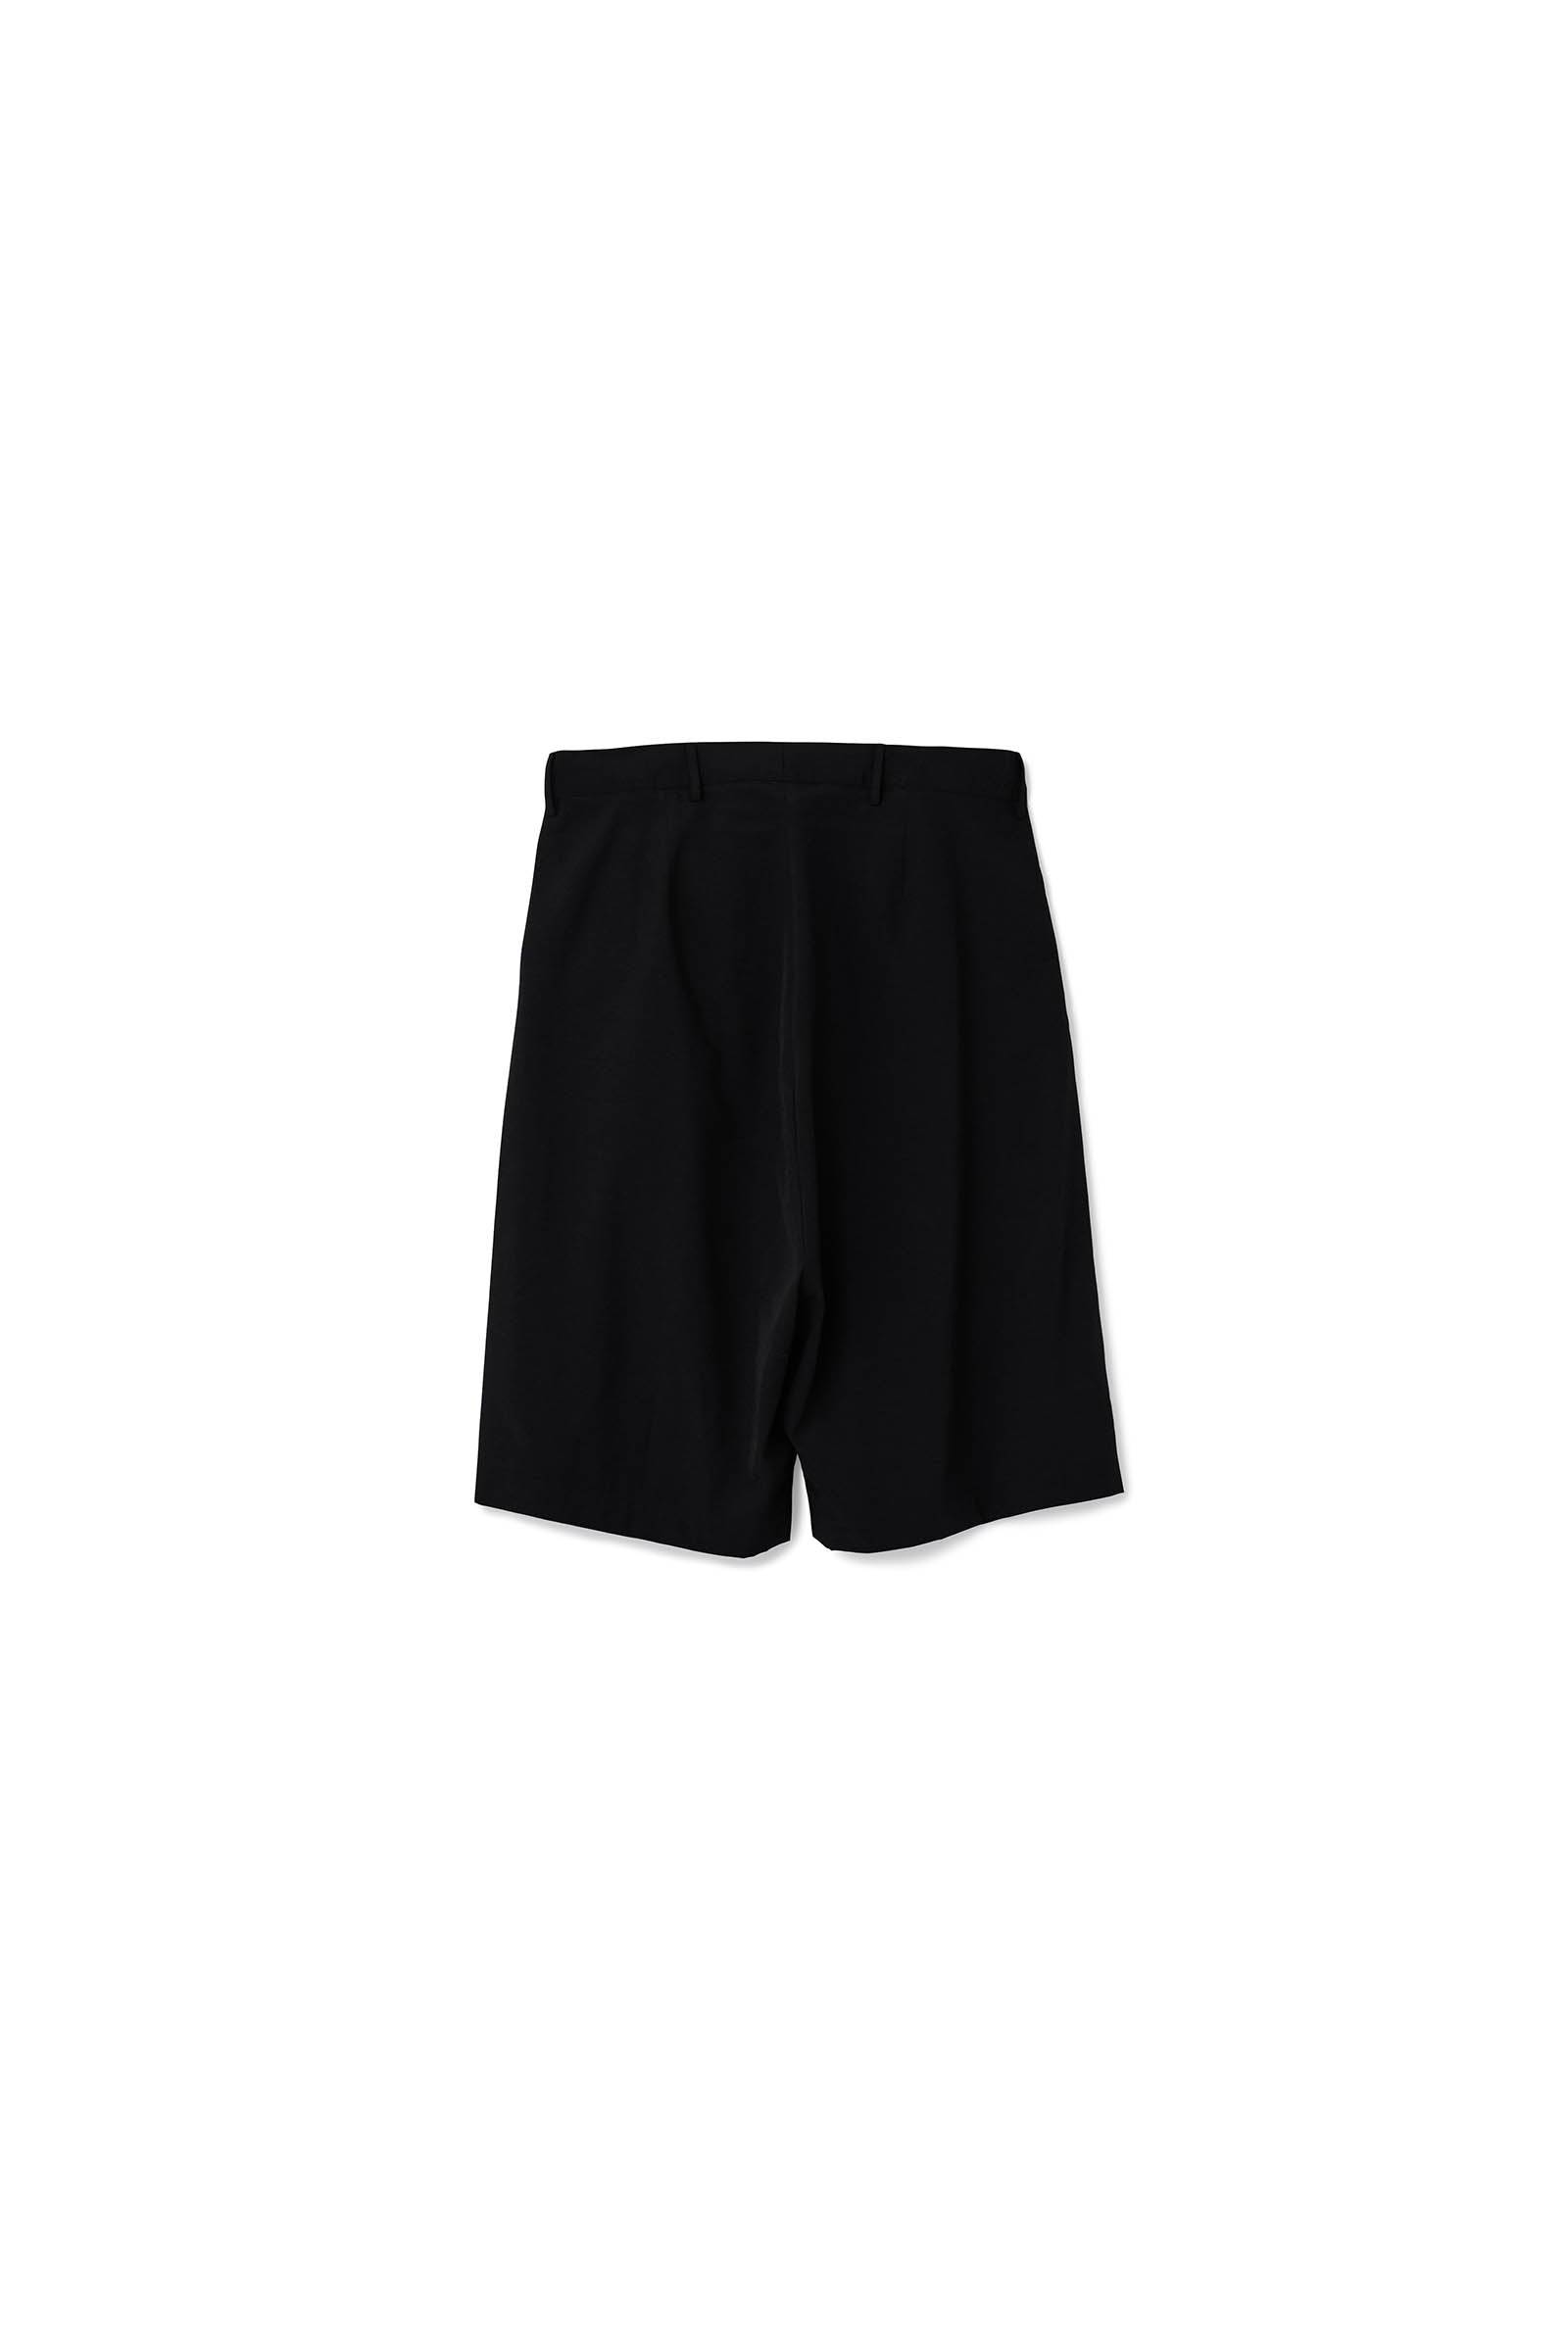 nonnotte / Draping Wide Shorts Type A (carol exclusive)